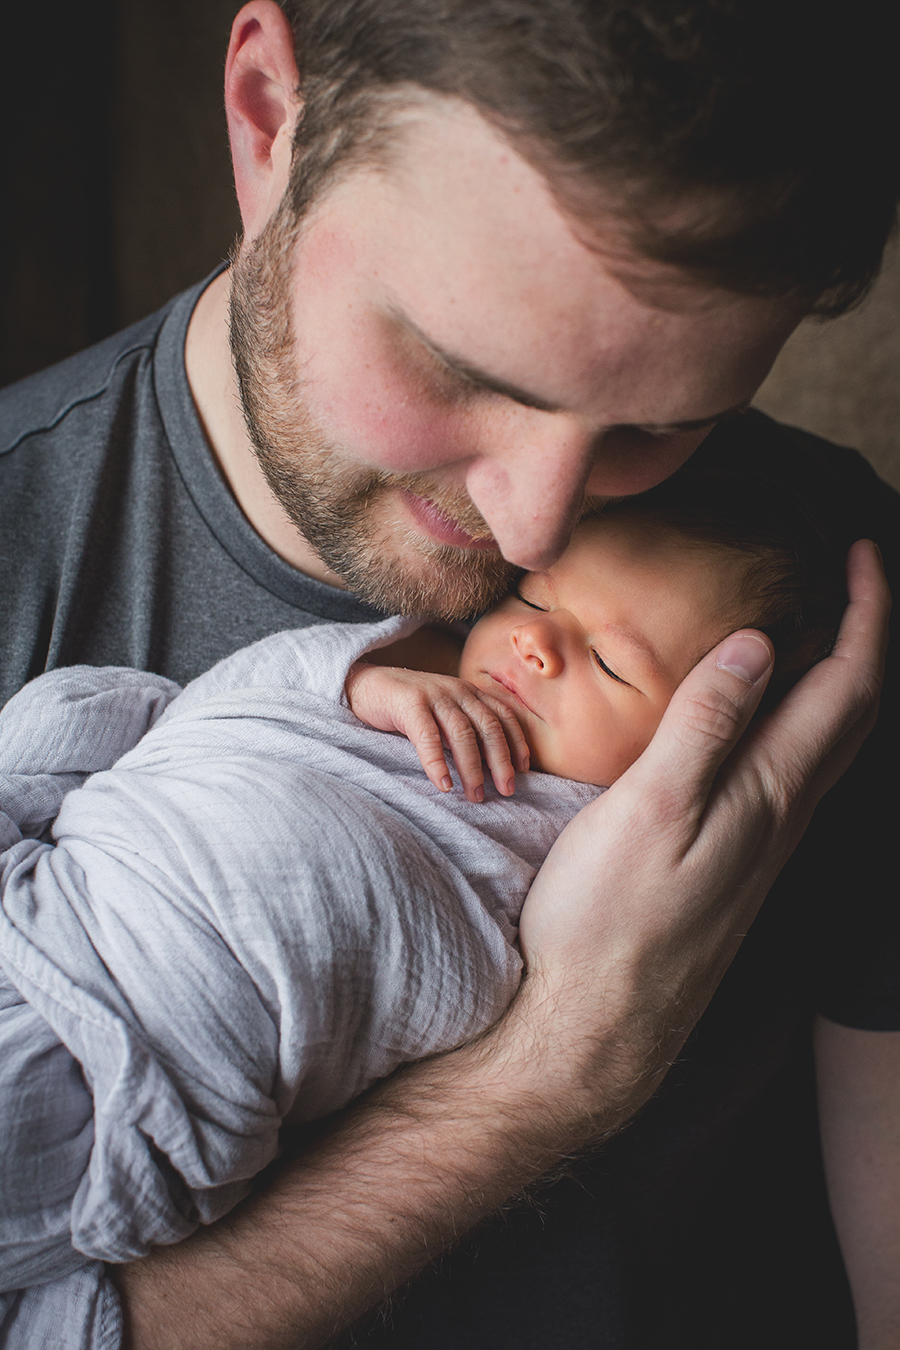 Daddy son in window light by Knoxville Wedding Photographer, Amanda May Photos.